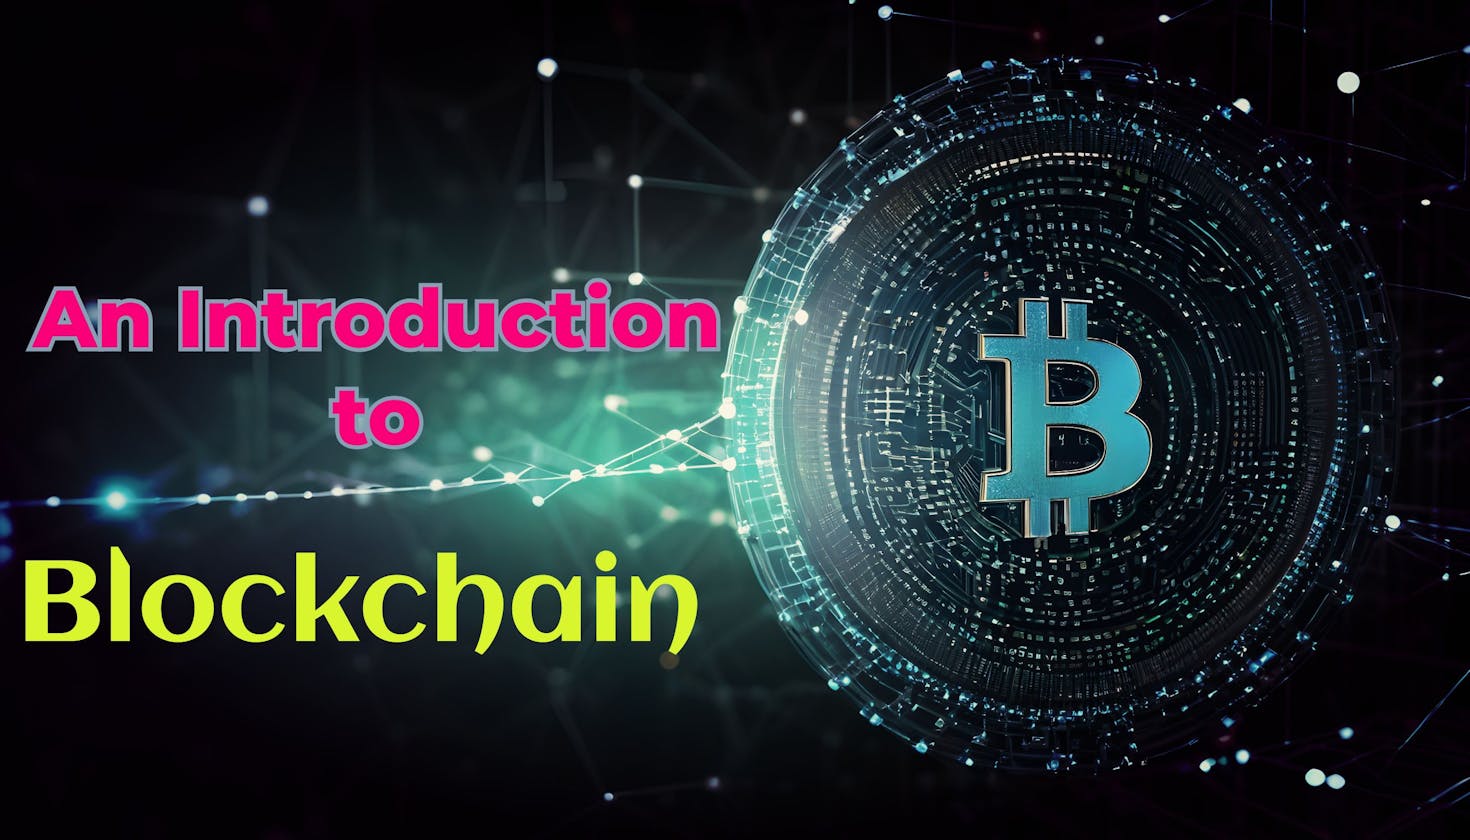 An Introduction to Blockchain